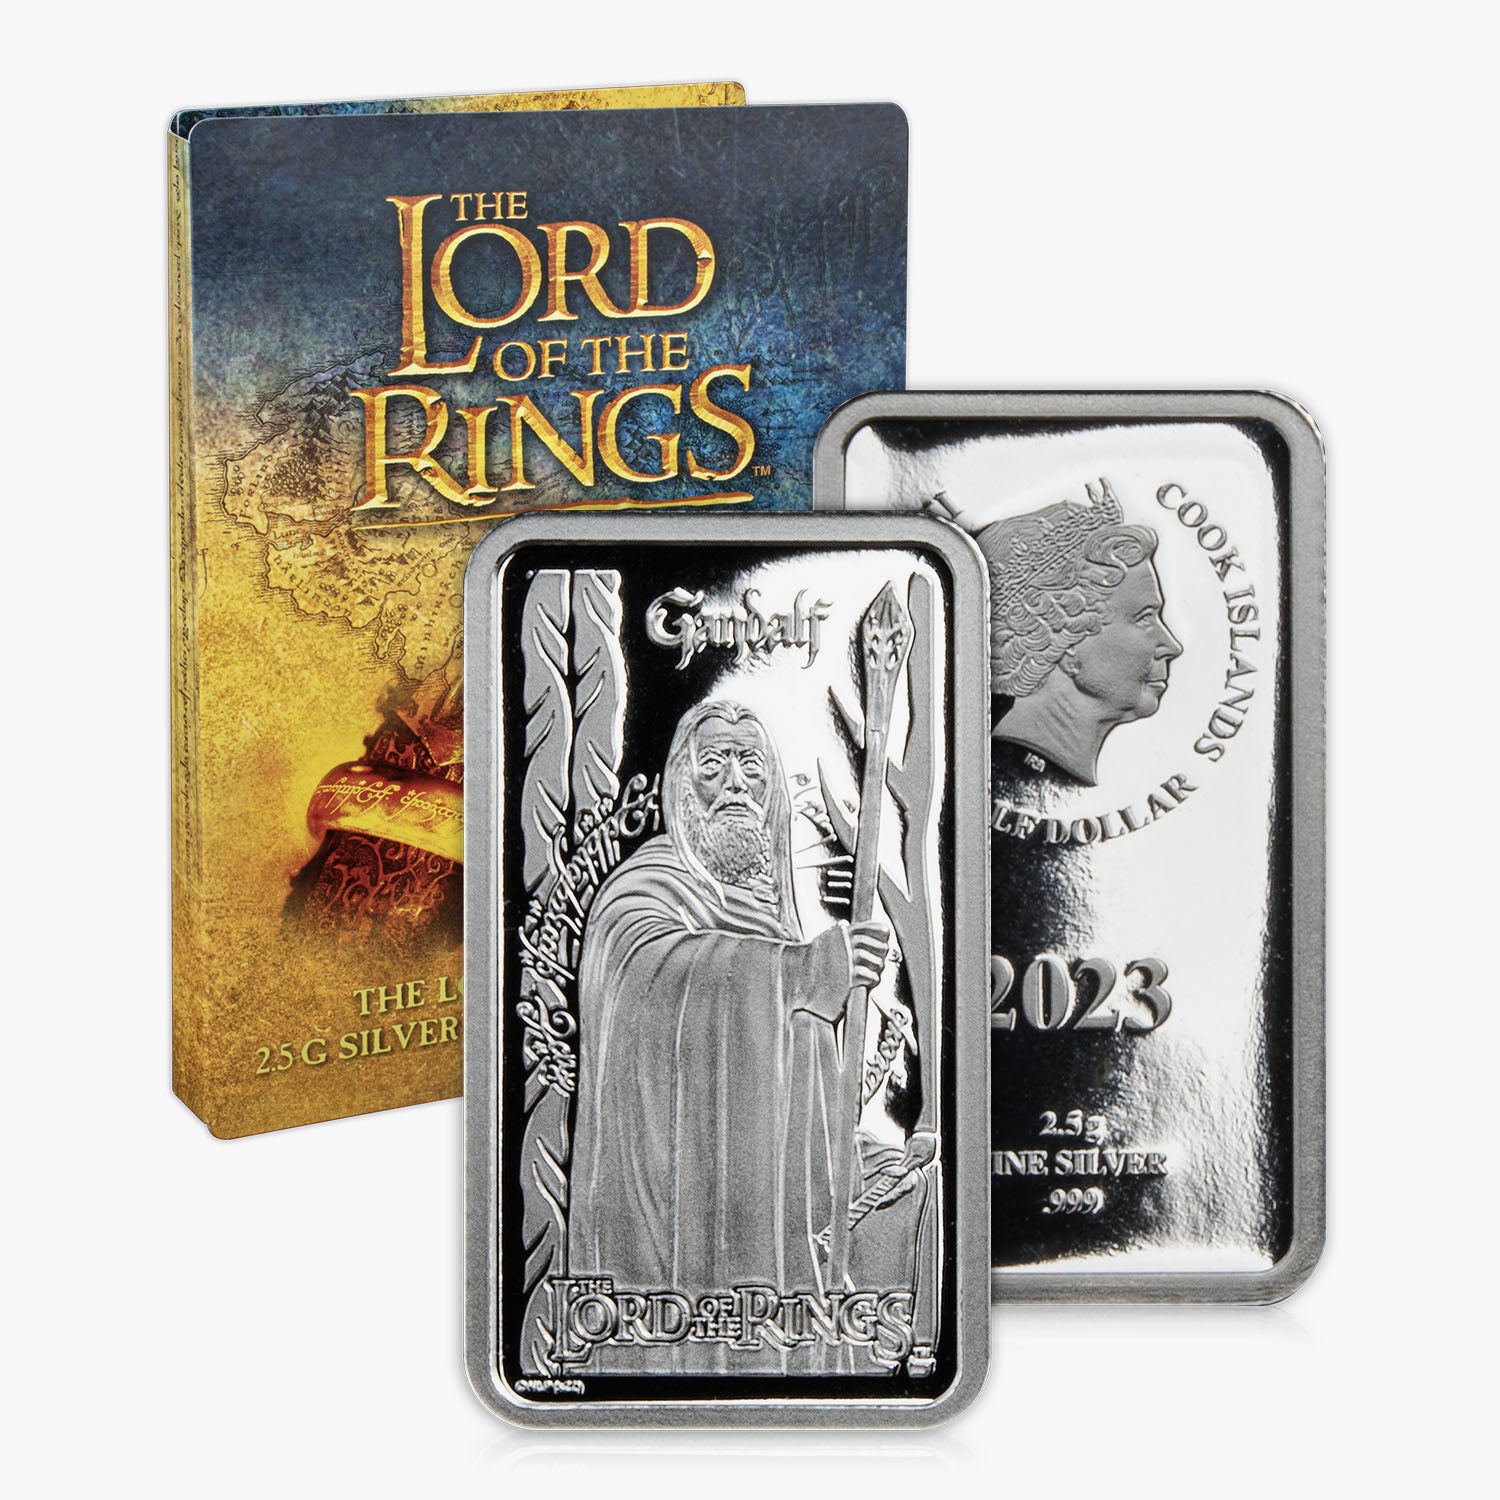 2022 1 oz Niue Silver Lord of the Rings Mount Doom Coin l JM Bullion™